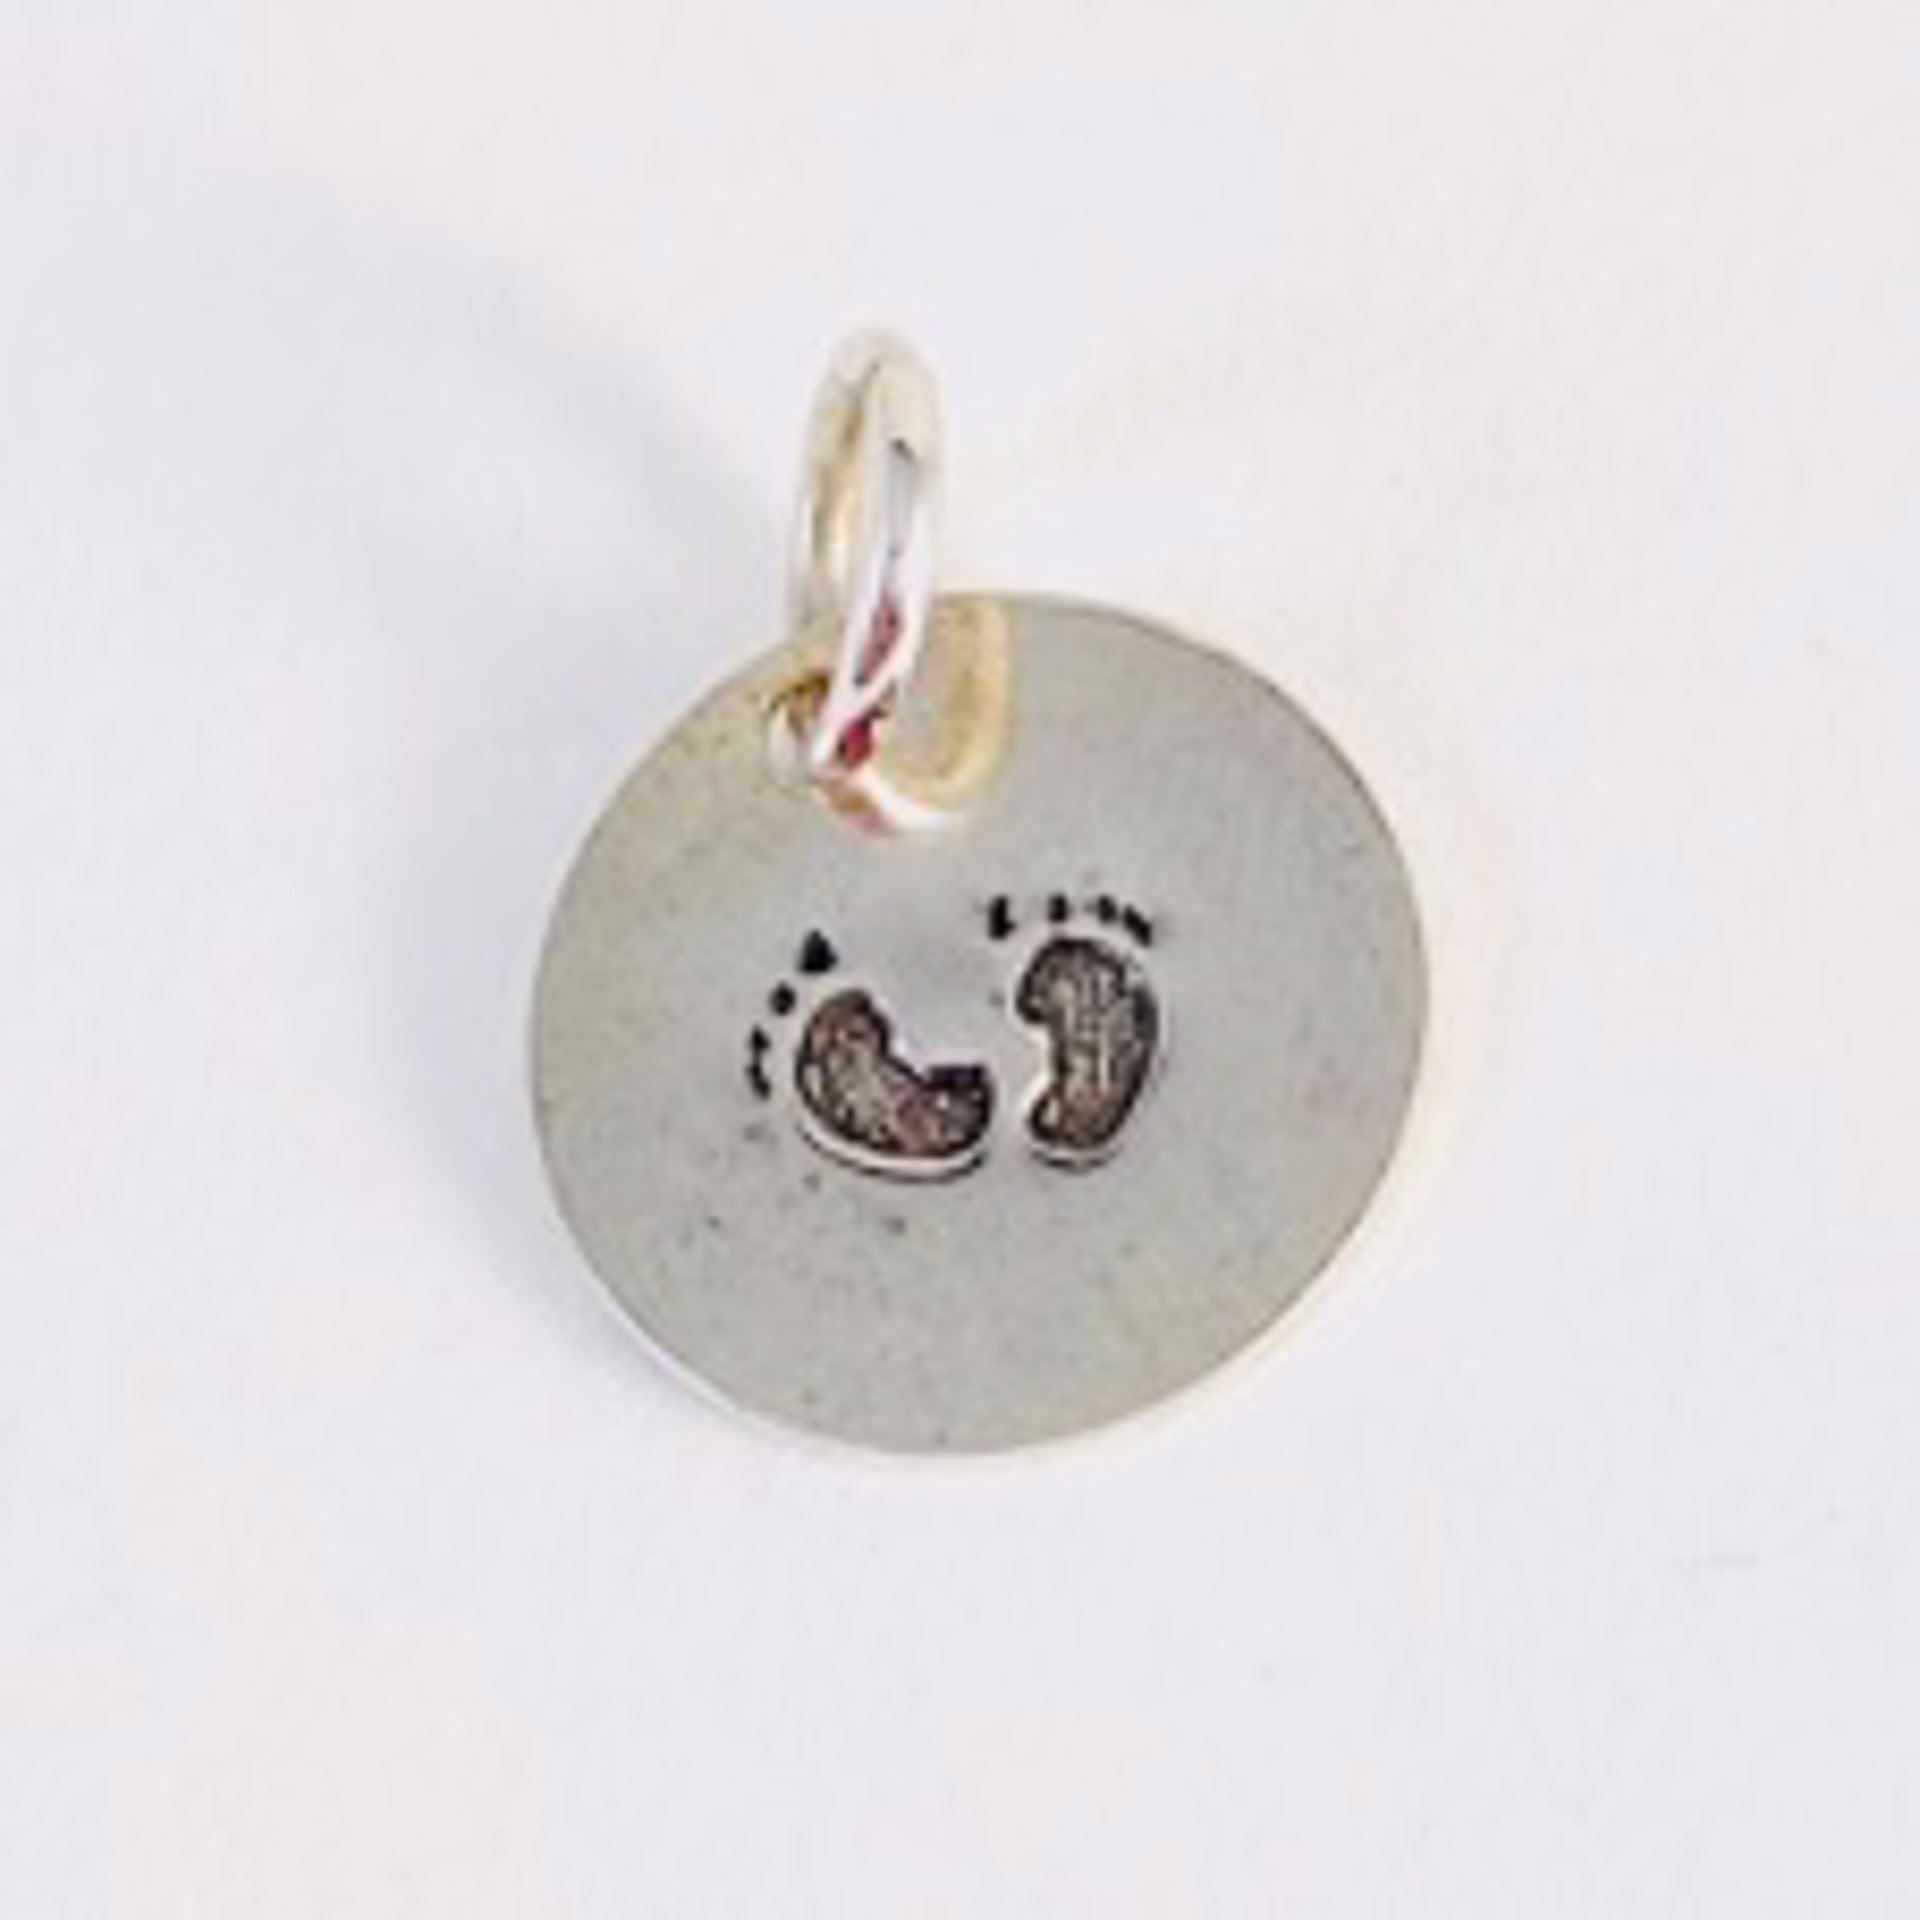 Mini Foot Prints Pendant by Shelby Lee - jewelry